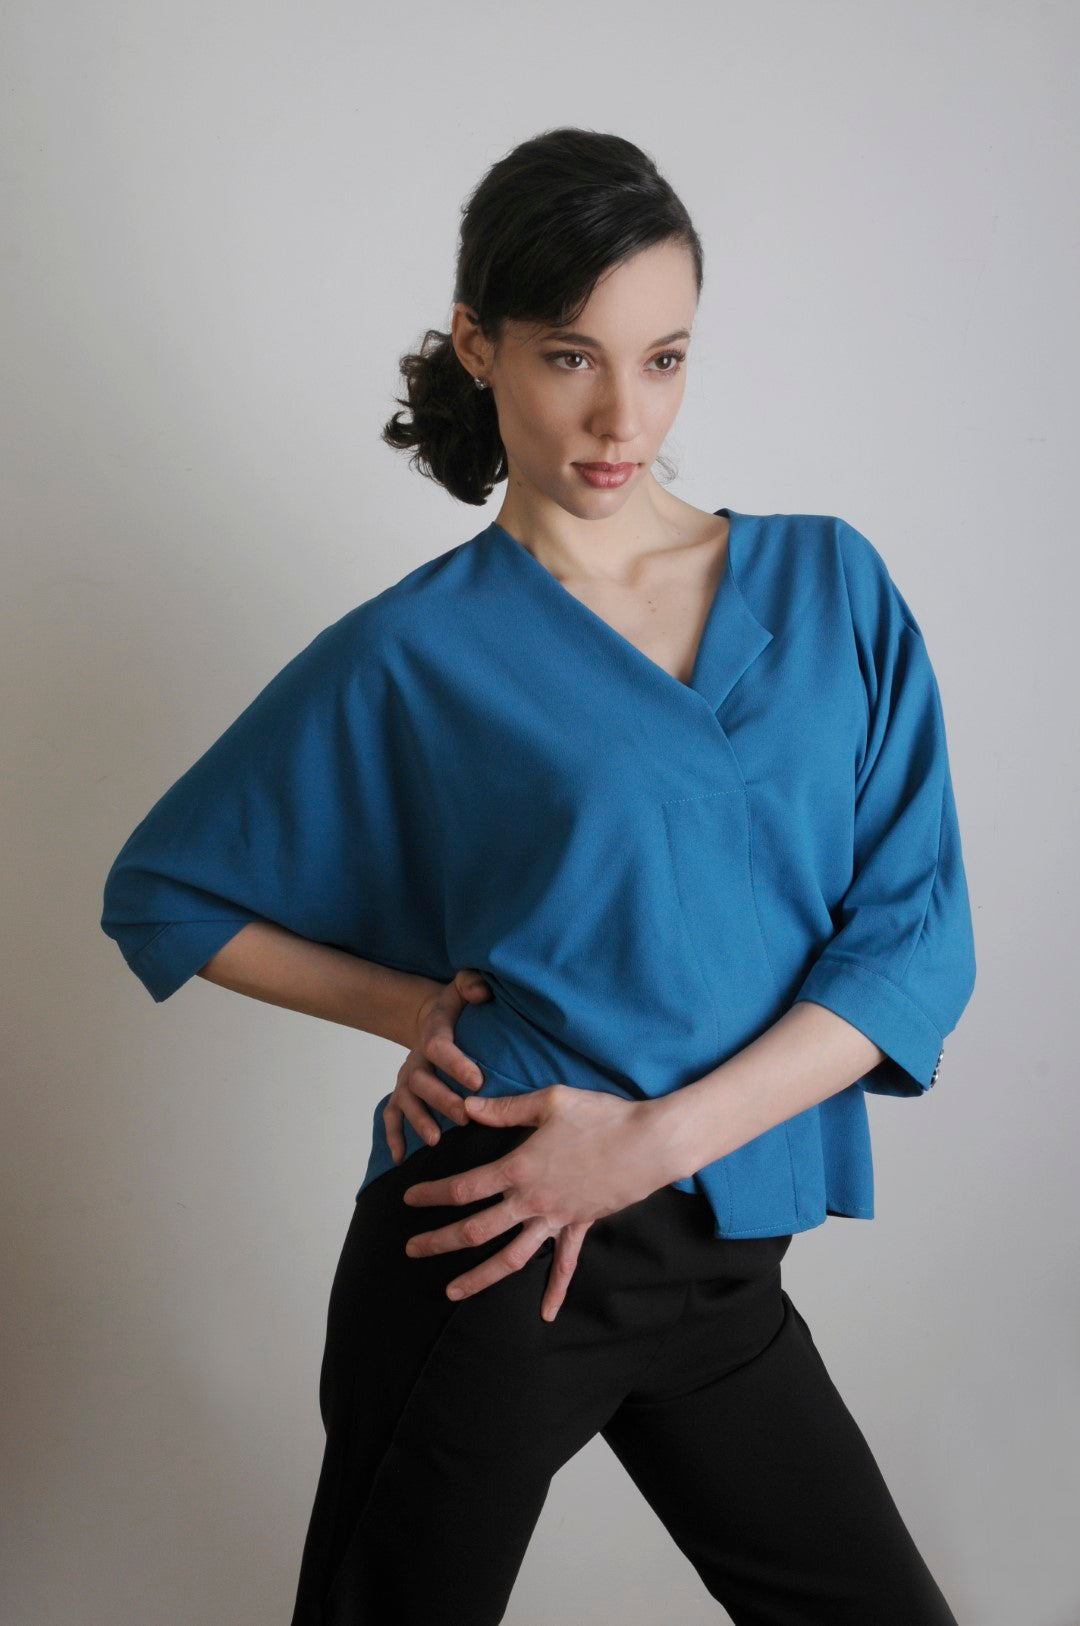 Model wears Bella blouse in teal  in an oversized XL for her small frame. She is 5'11' tall